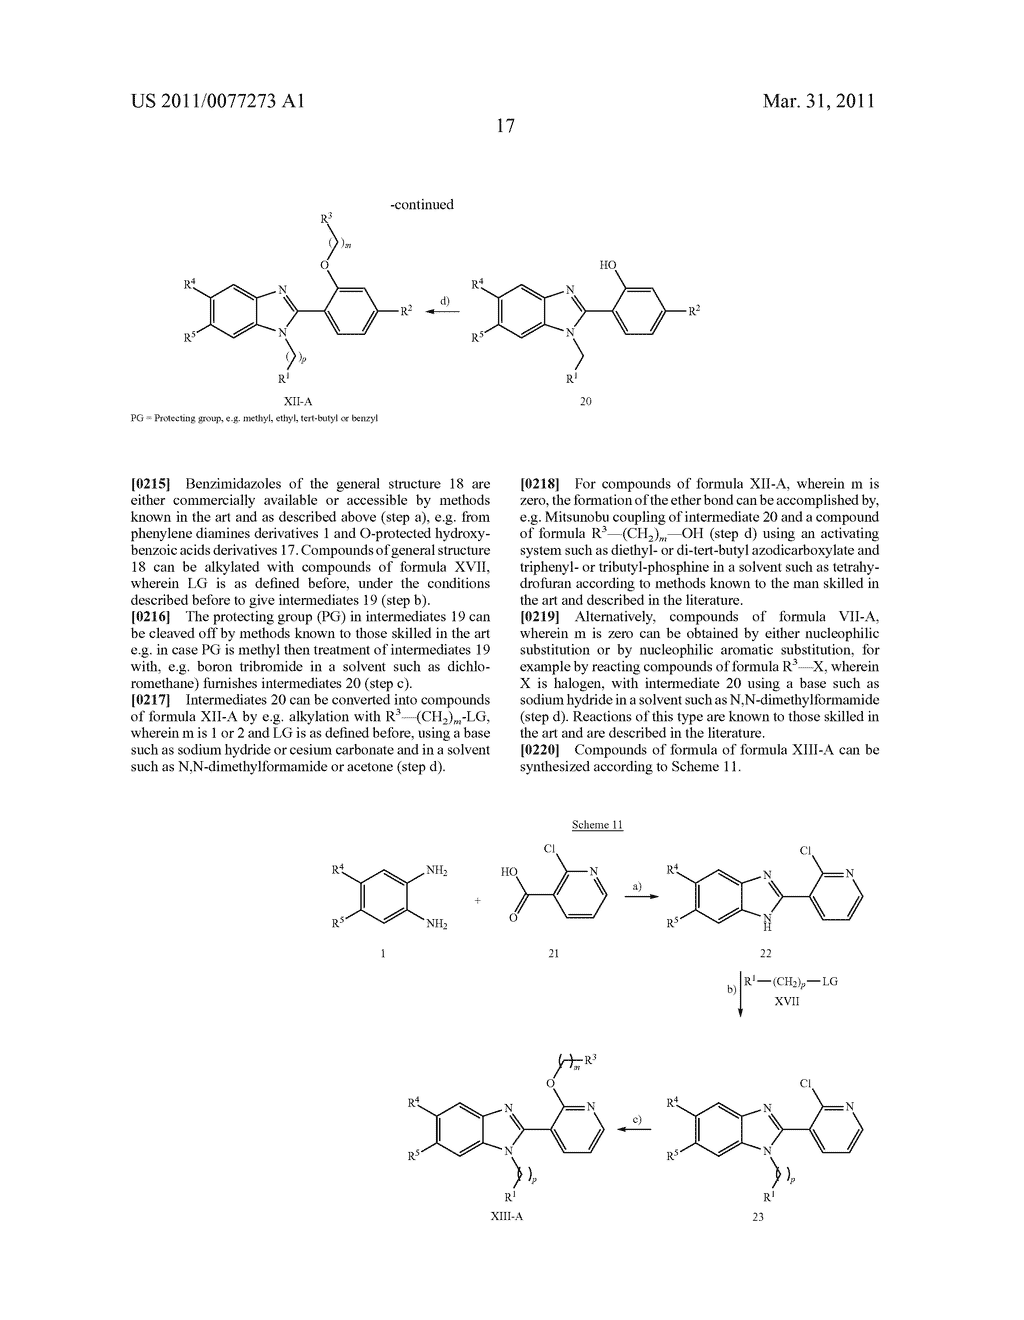 NEW BENZIMIDAZOLE DERIVATIVES - diagram, schematic, and image 18